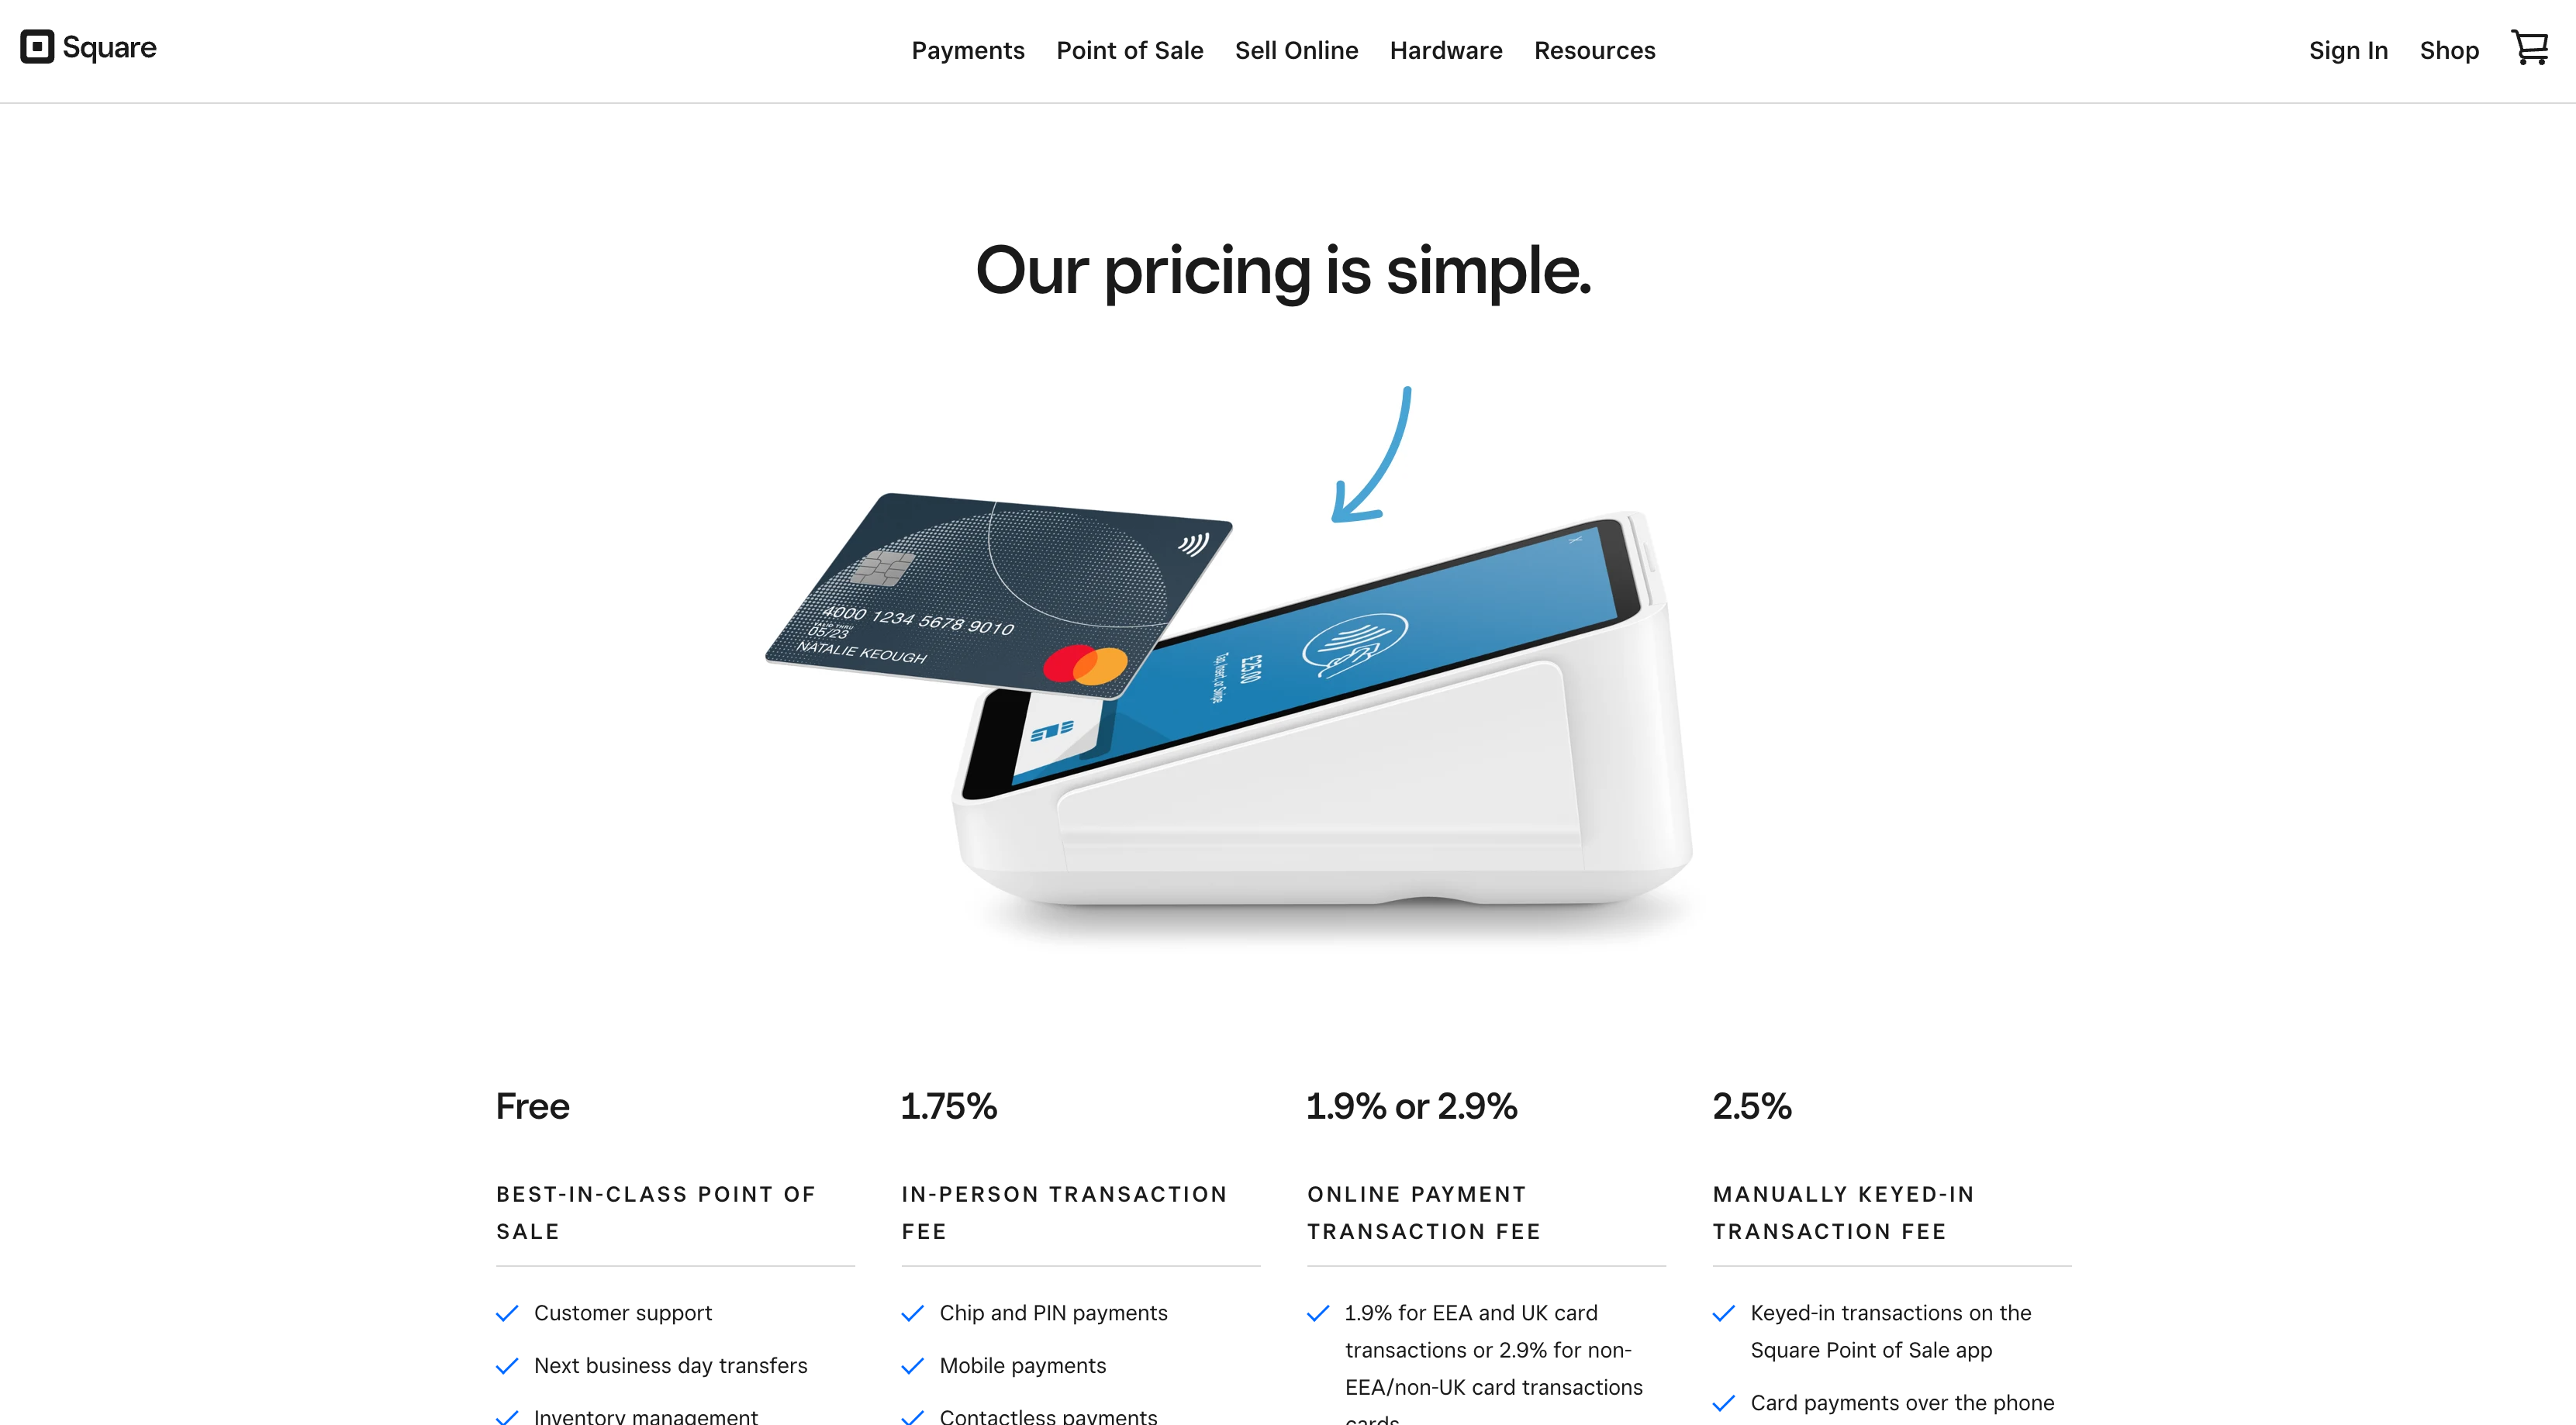 Square payments SaaS pricing model